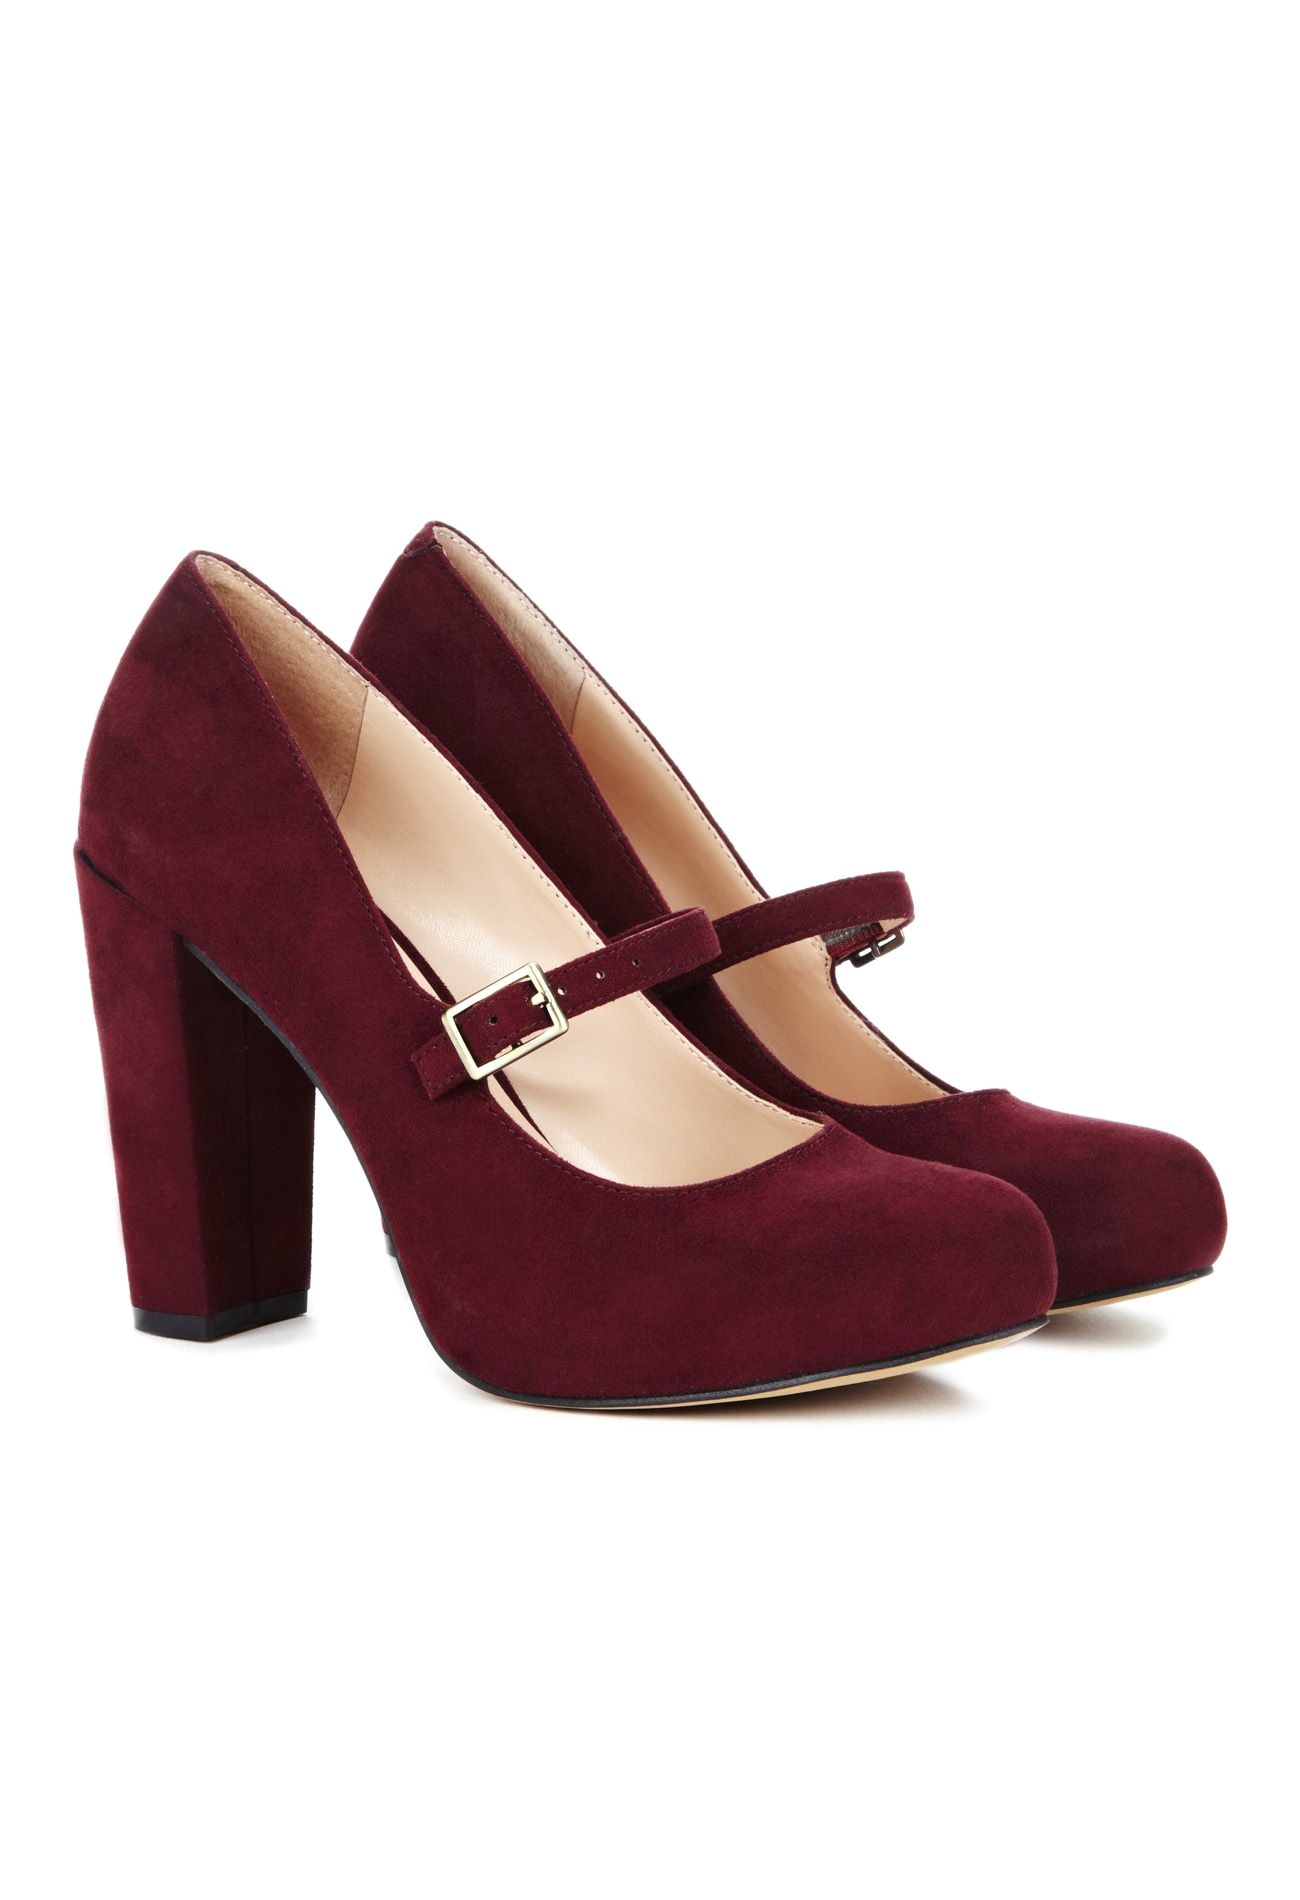 burgundy heels perfect for fall love the fat heel for balance